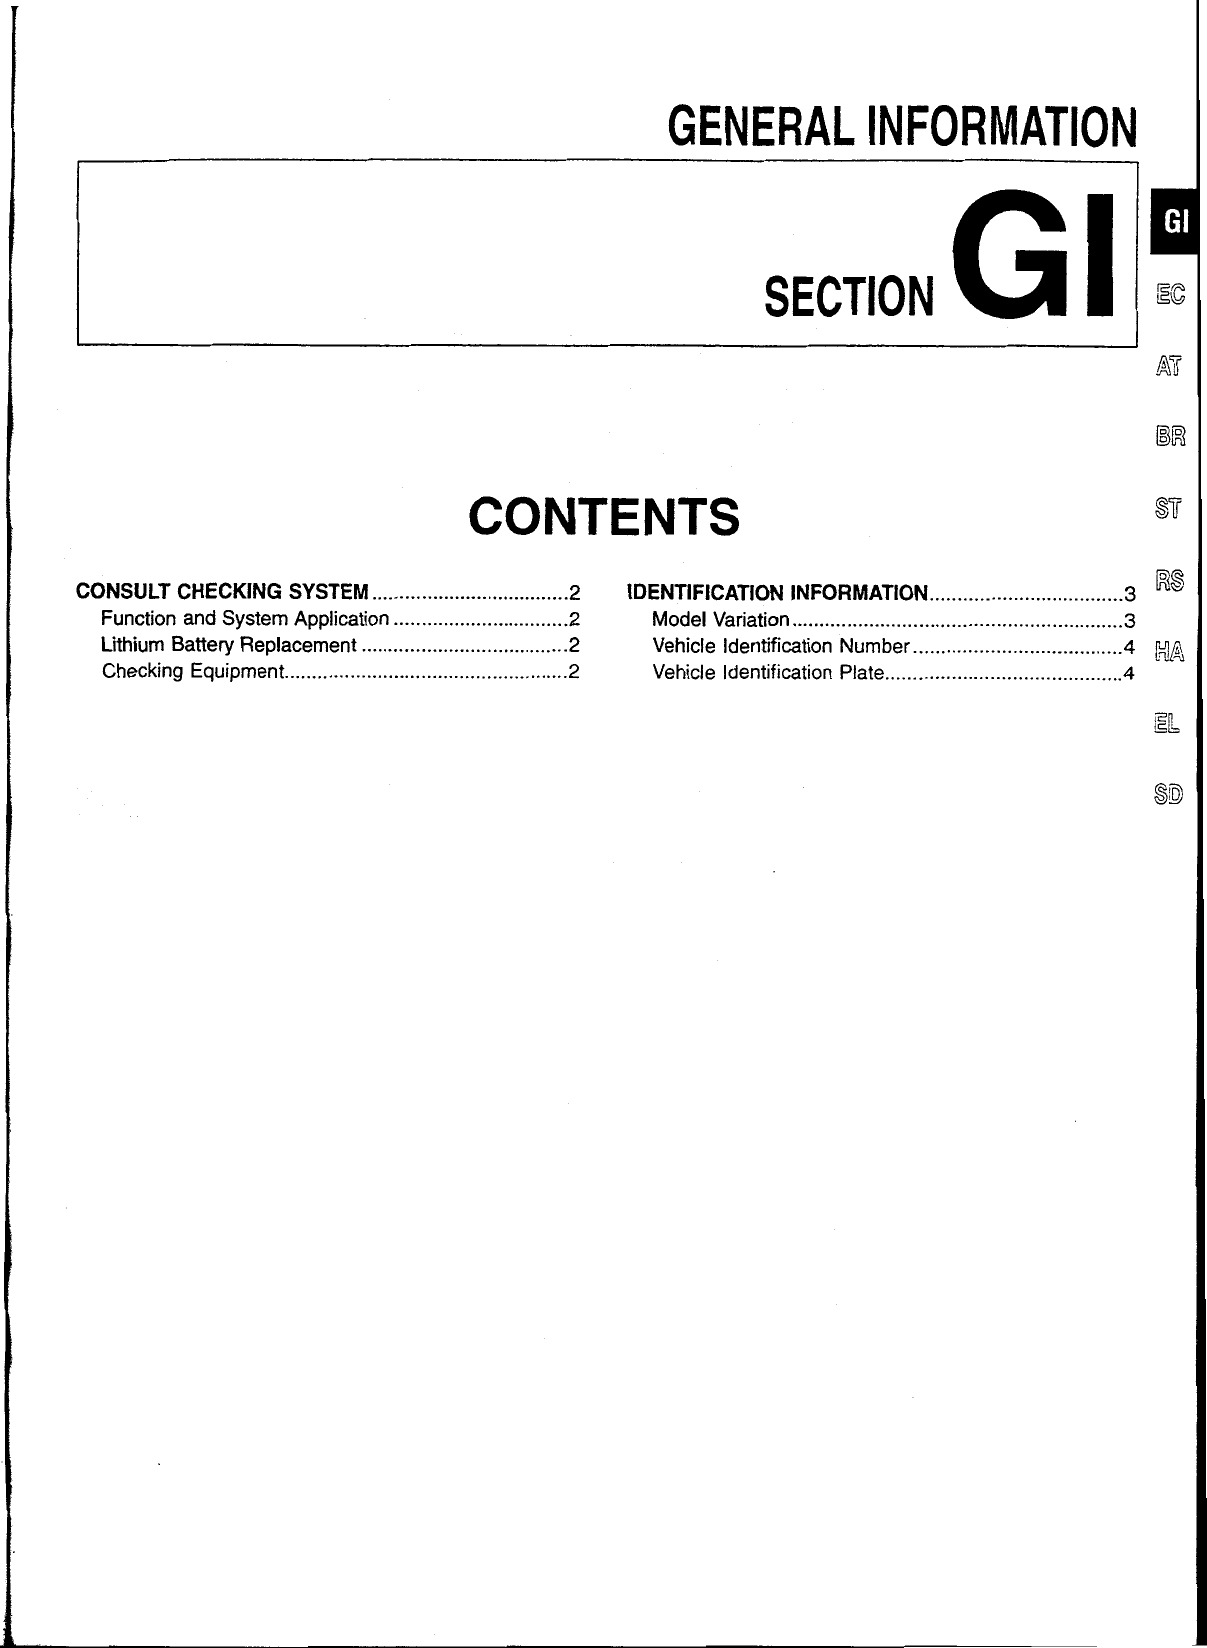 1998-2002 Nissan Skyline R34 service manual Preview image 4